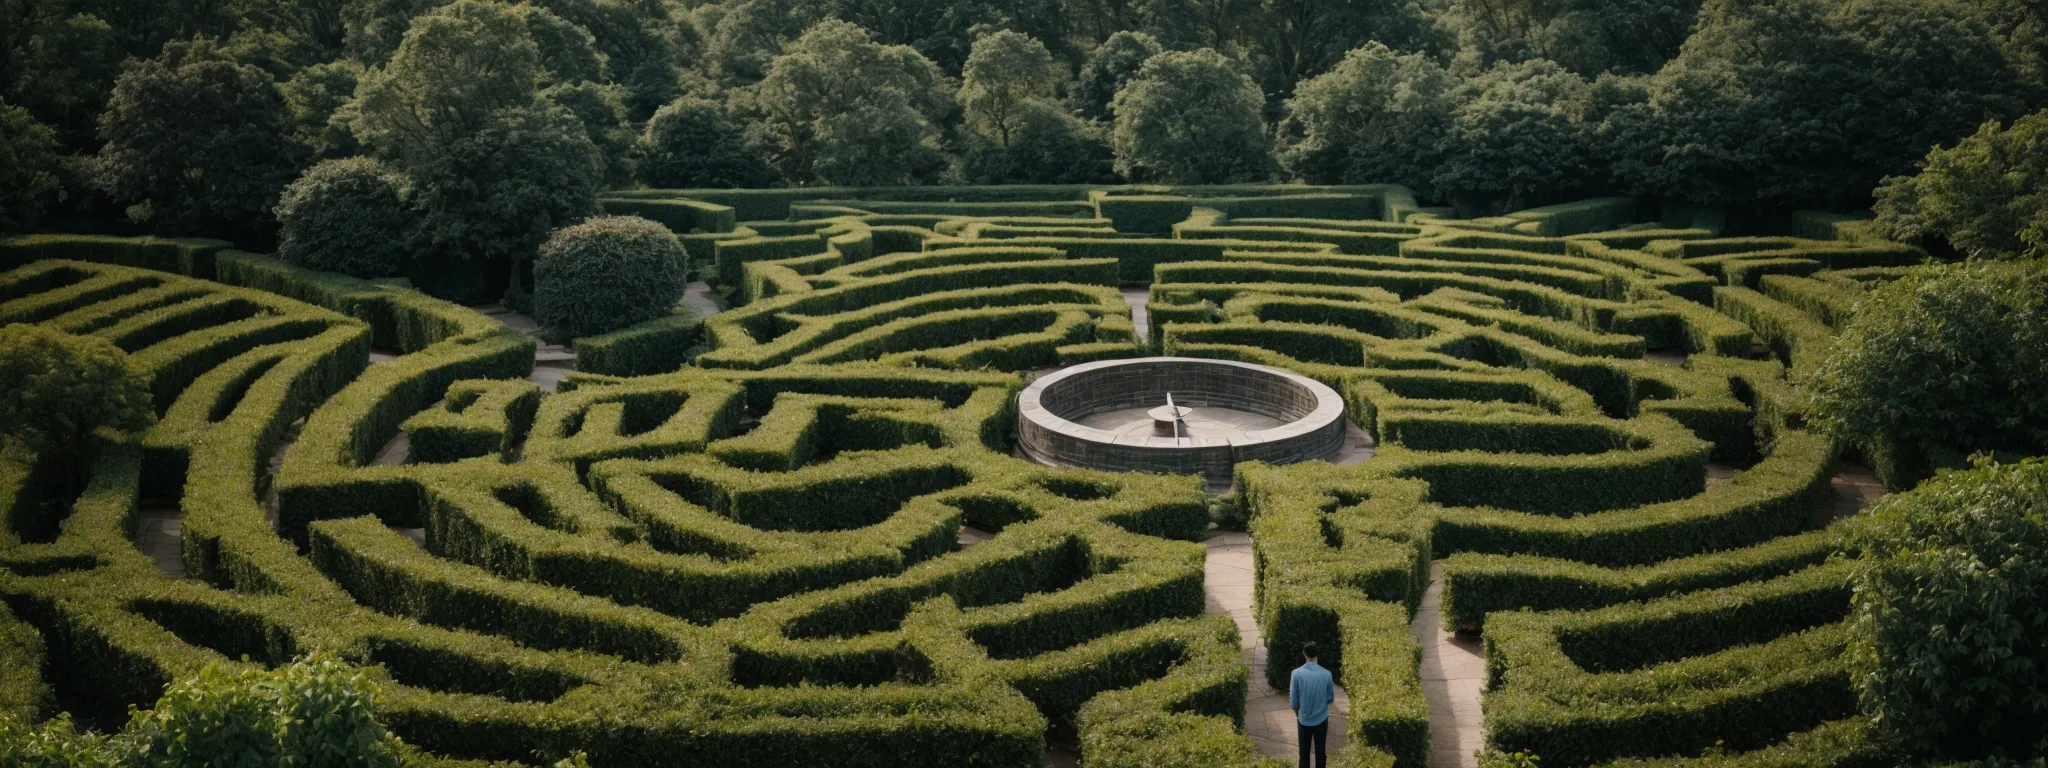 an individual stands before a maze entrance, gazing at an open compass and a map highlighting a path through the intricate hedges.